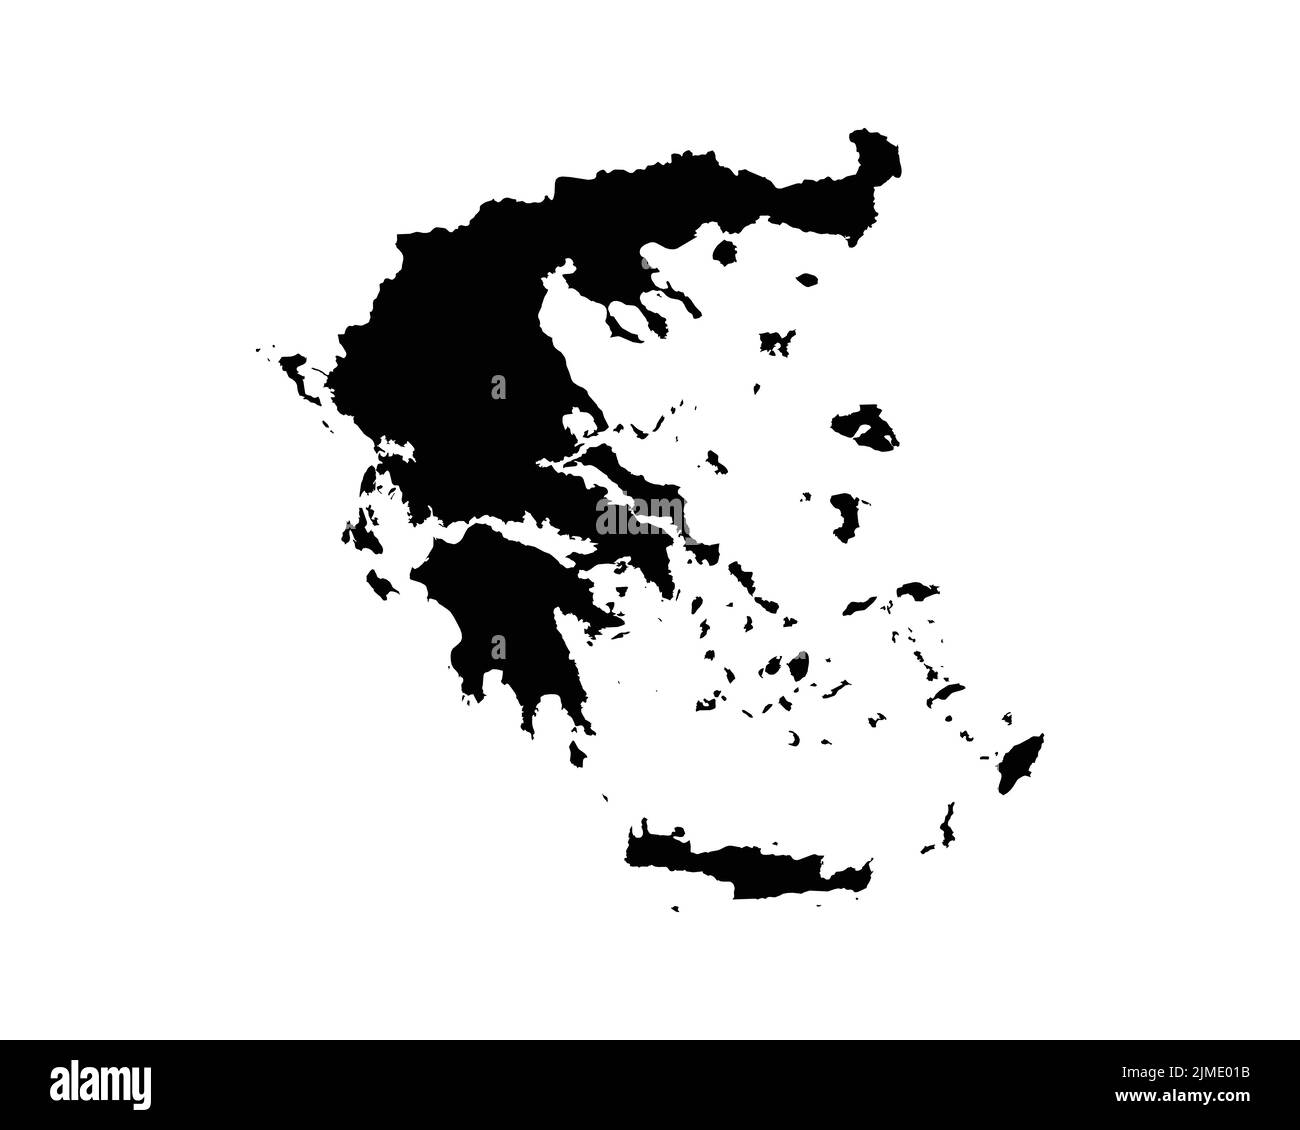 Greece Map. Greek Country Map. Hellenic Republic Black and White National Nation Outline Geography Border Boundary Shape Territory Vector Illustration Stock Vector